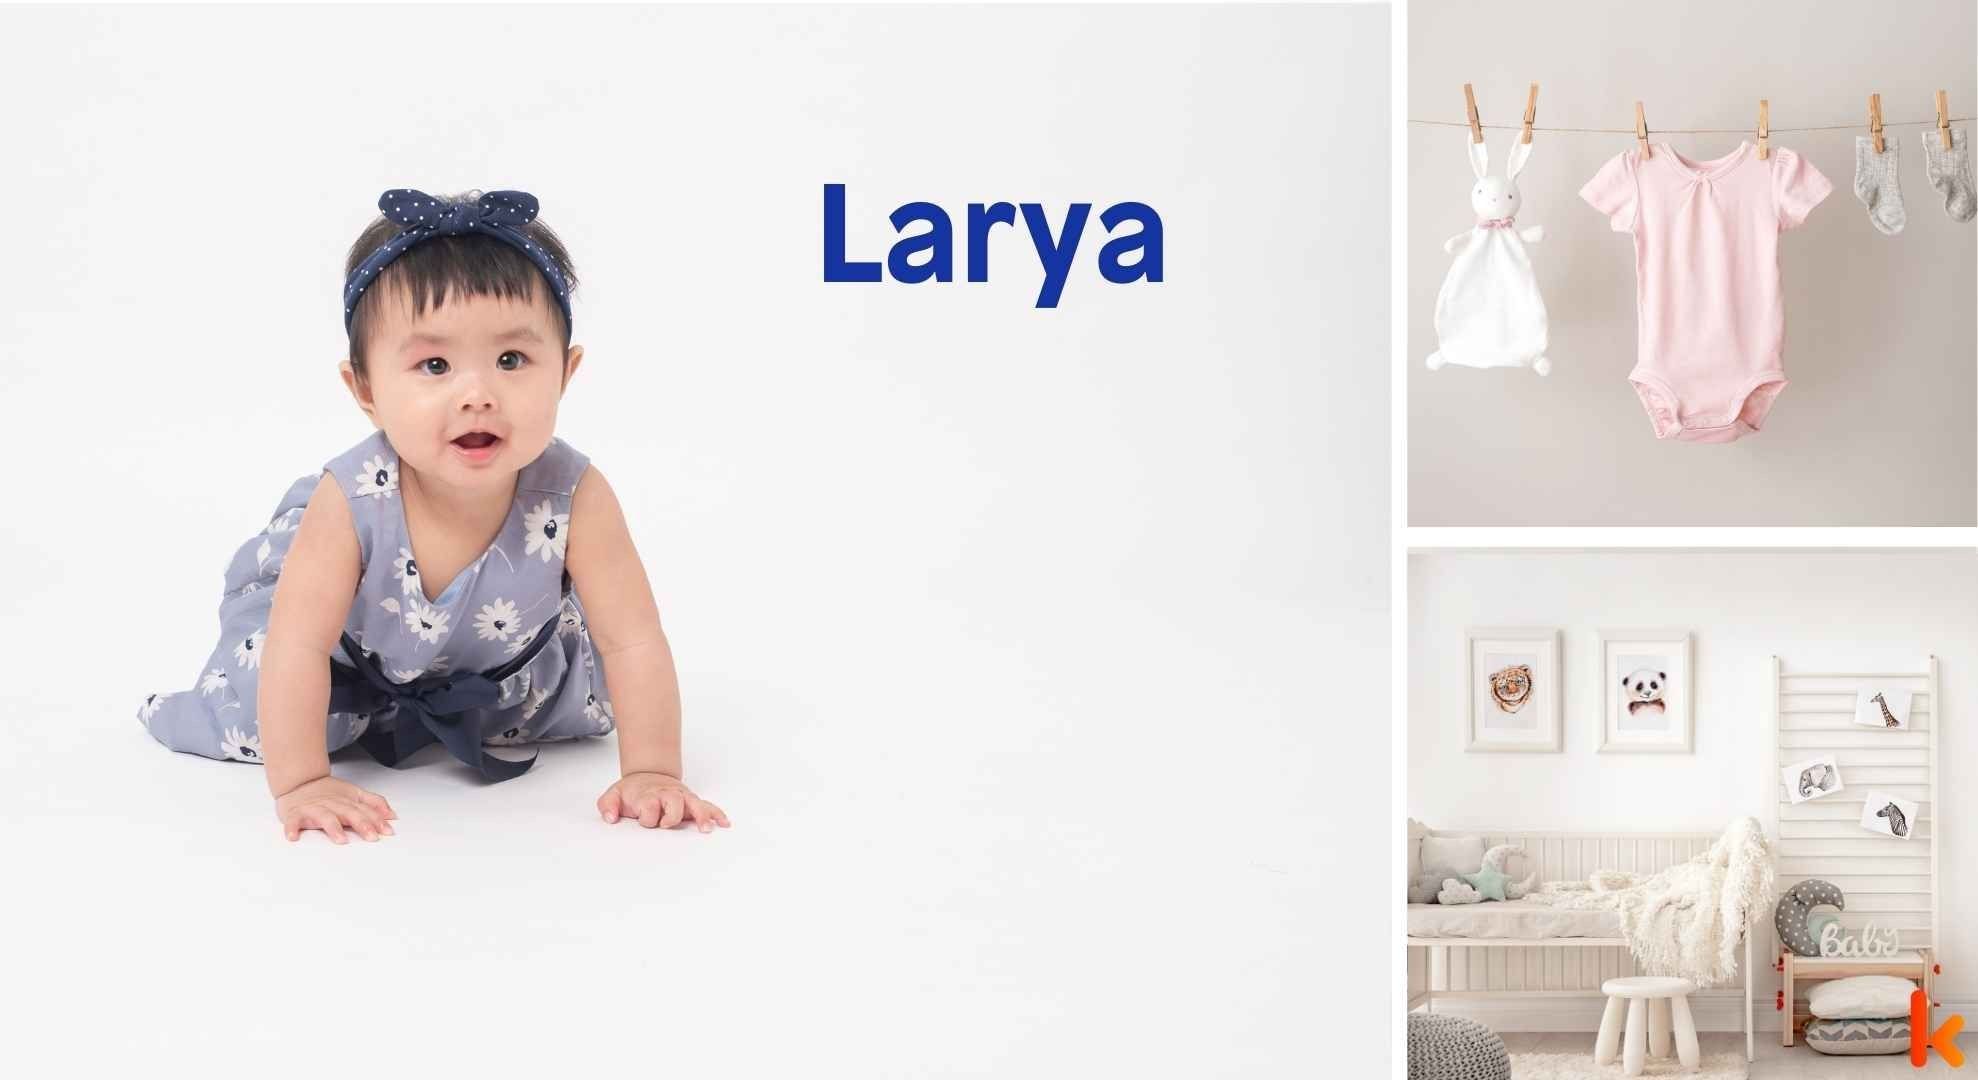 Meaning of the name Larya